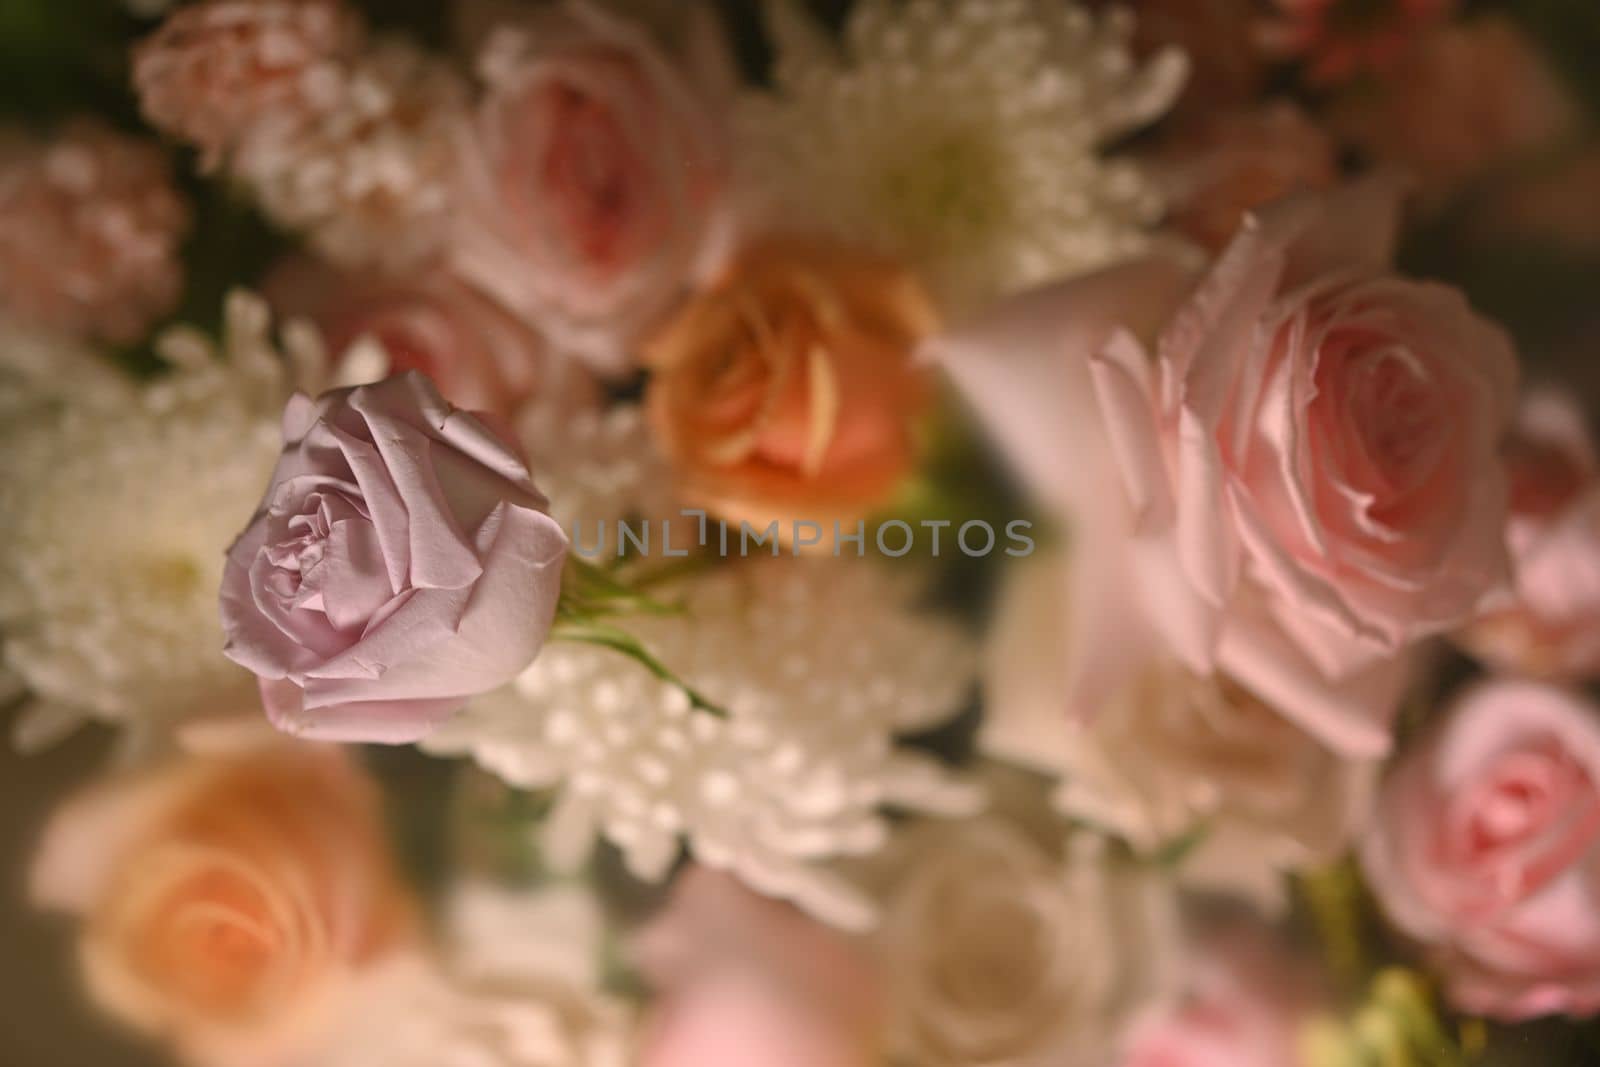 Beautiful pink and white flowers in foggy glass blurry condensation. Textiles, paper, floral botanical wallpaper.